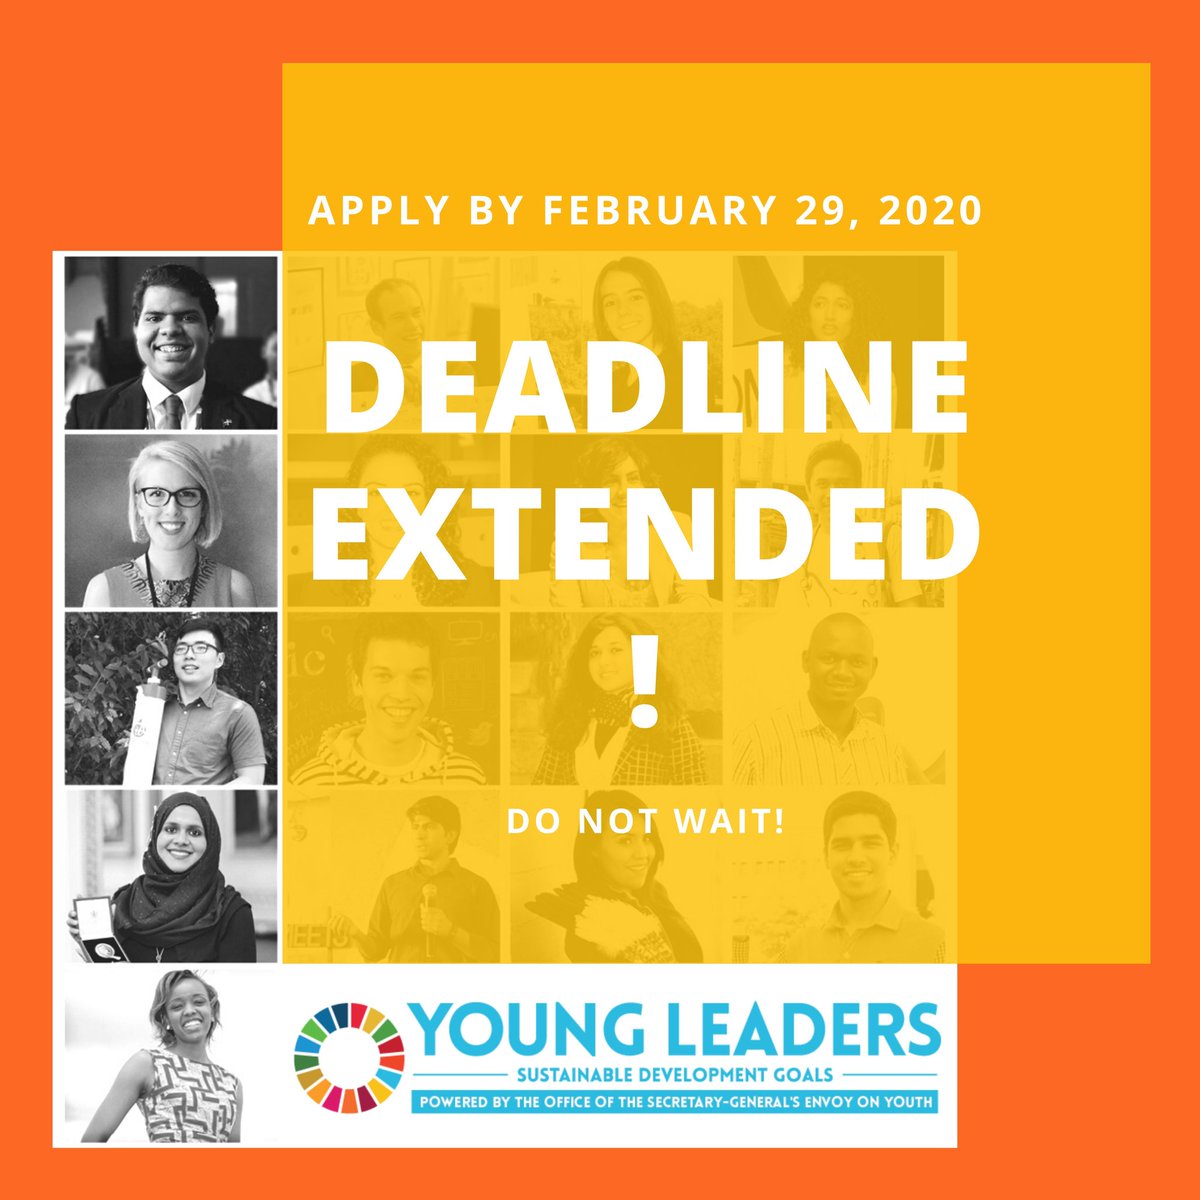 Application extended. Apply today to become one of the #SDGYoungLeaders
@unhabitatyouth @MoICTKenya @RoySasaka

un.submittable.com/submit